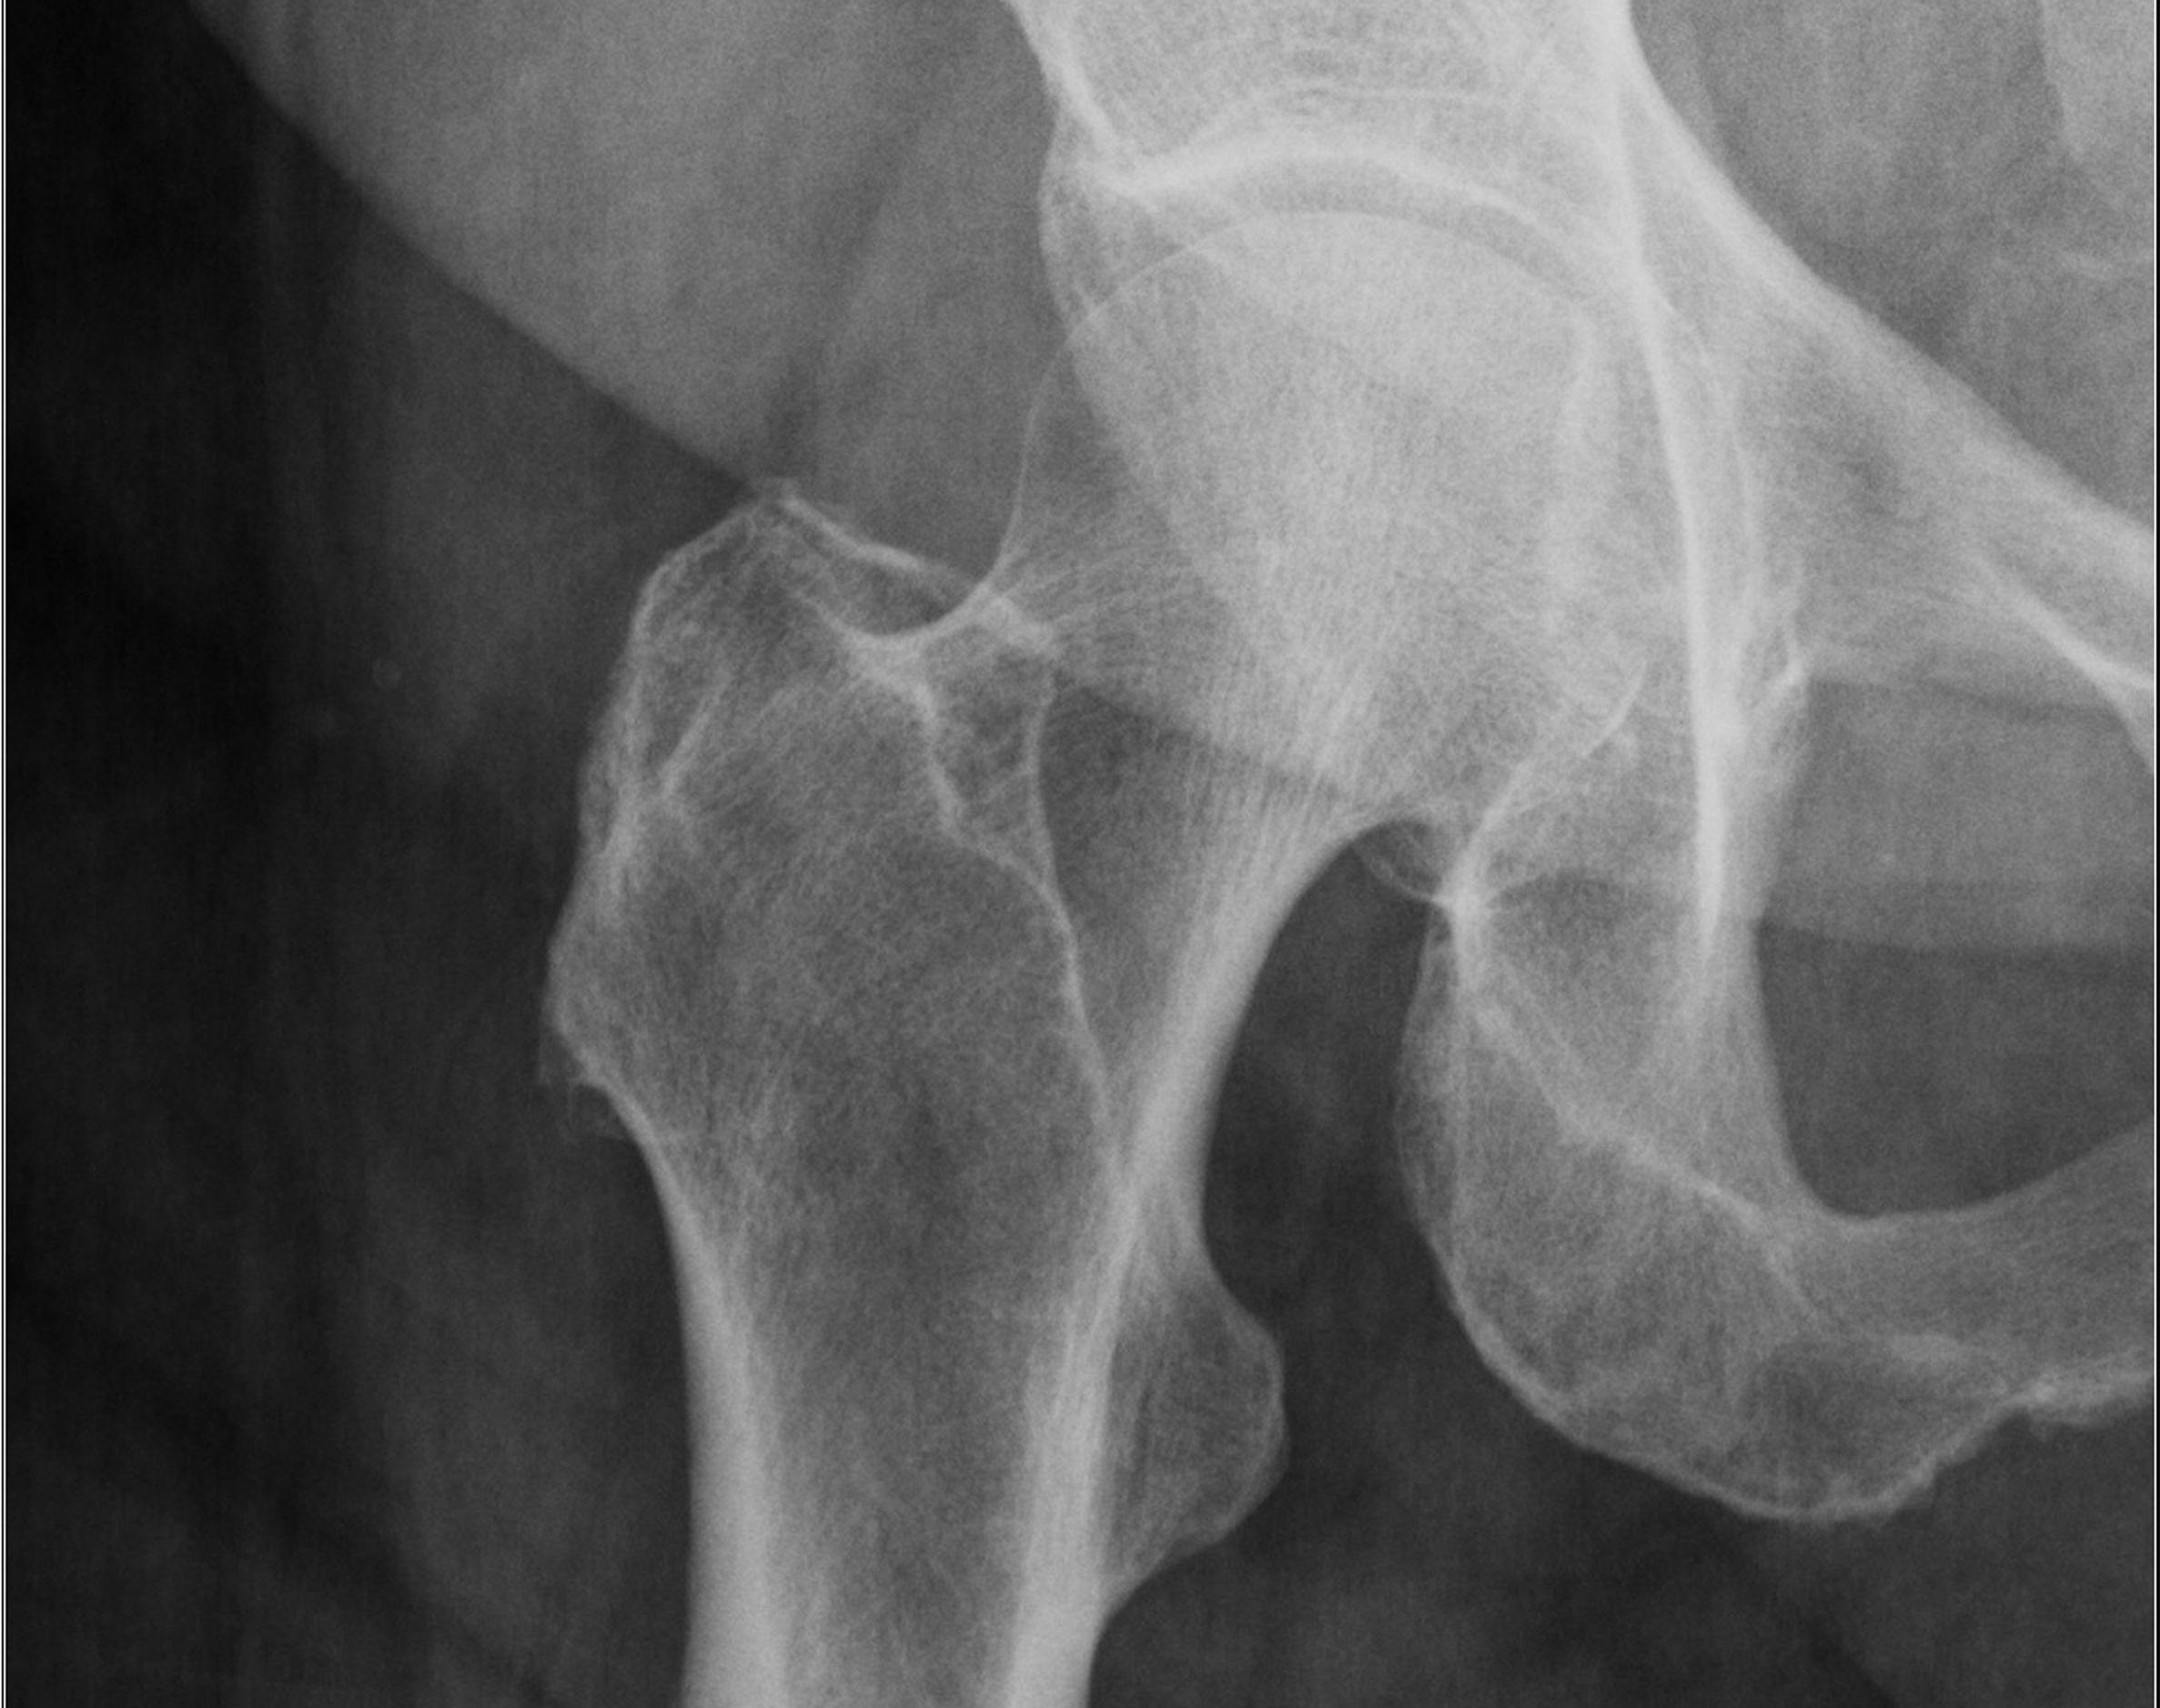 Study Finds Increases in Hospital Charges Responsible for Rising Cost of Hip Fracture Surgery